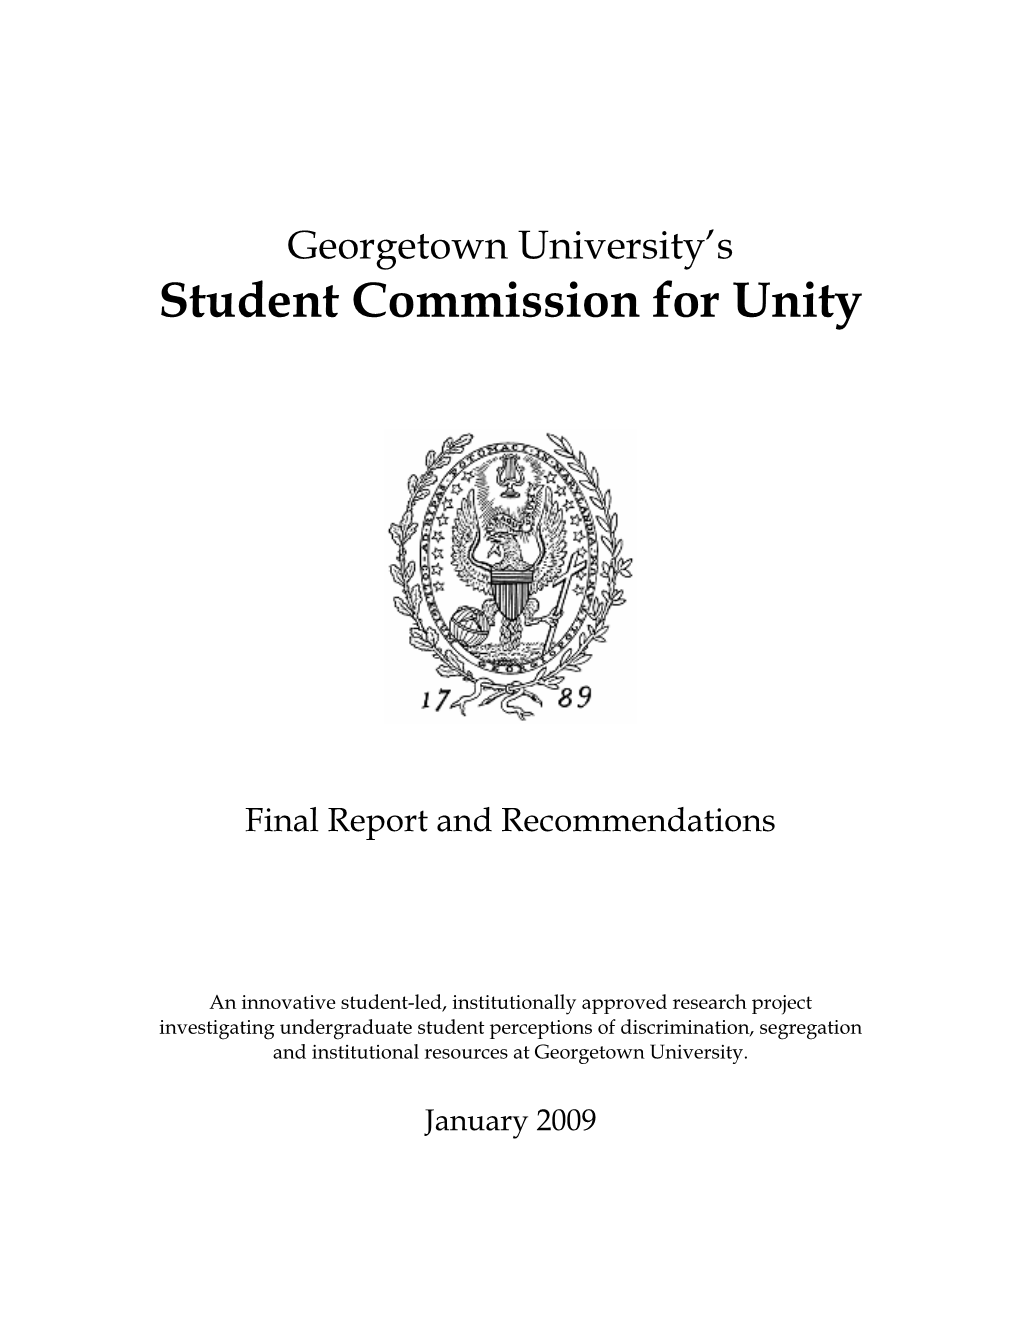 GUSA Student Commission for Unity